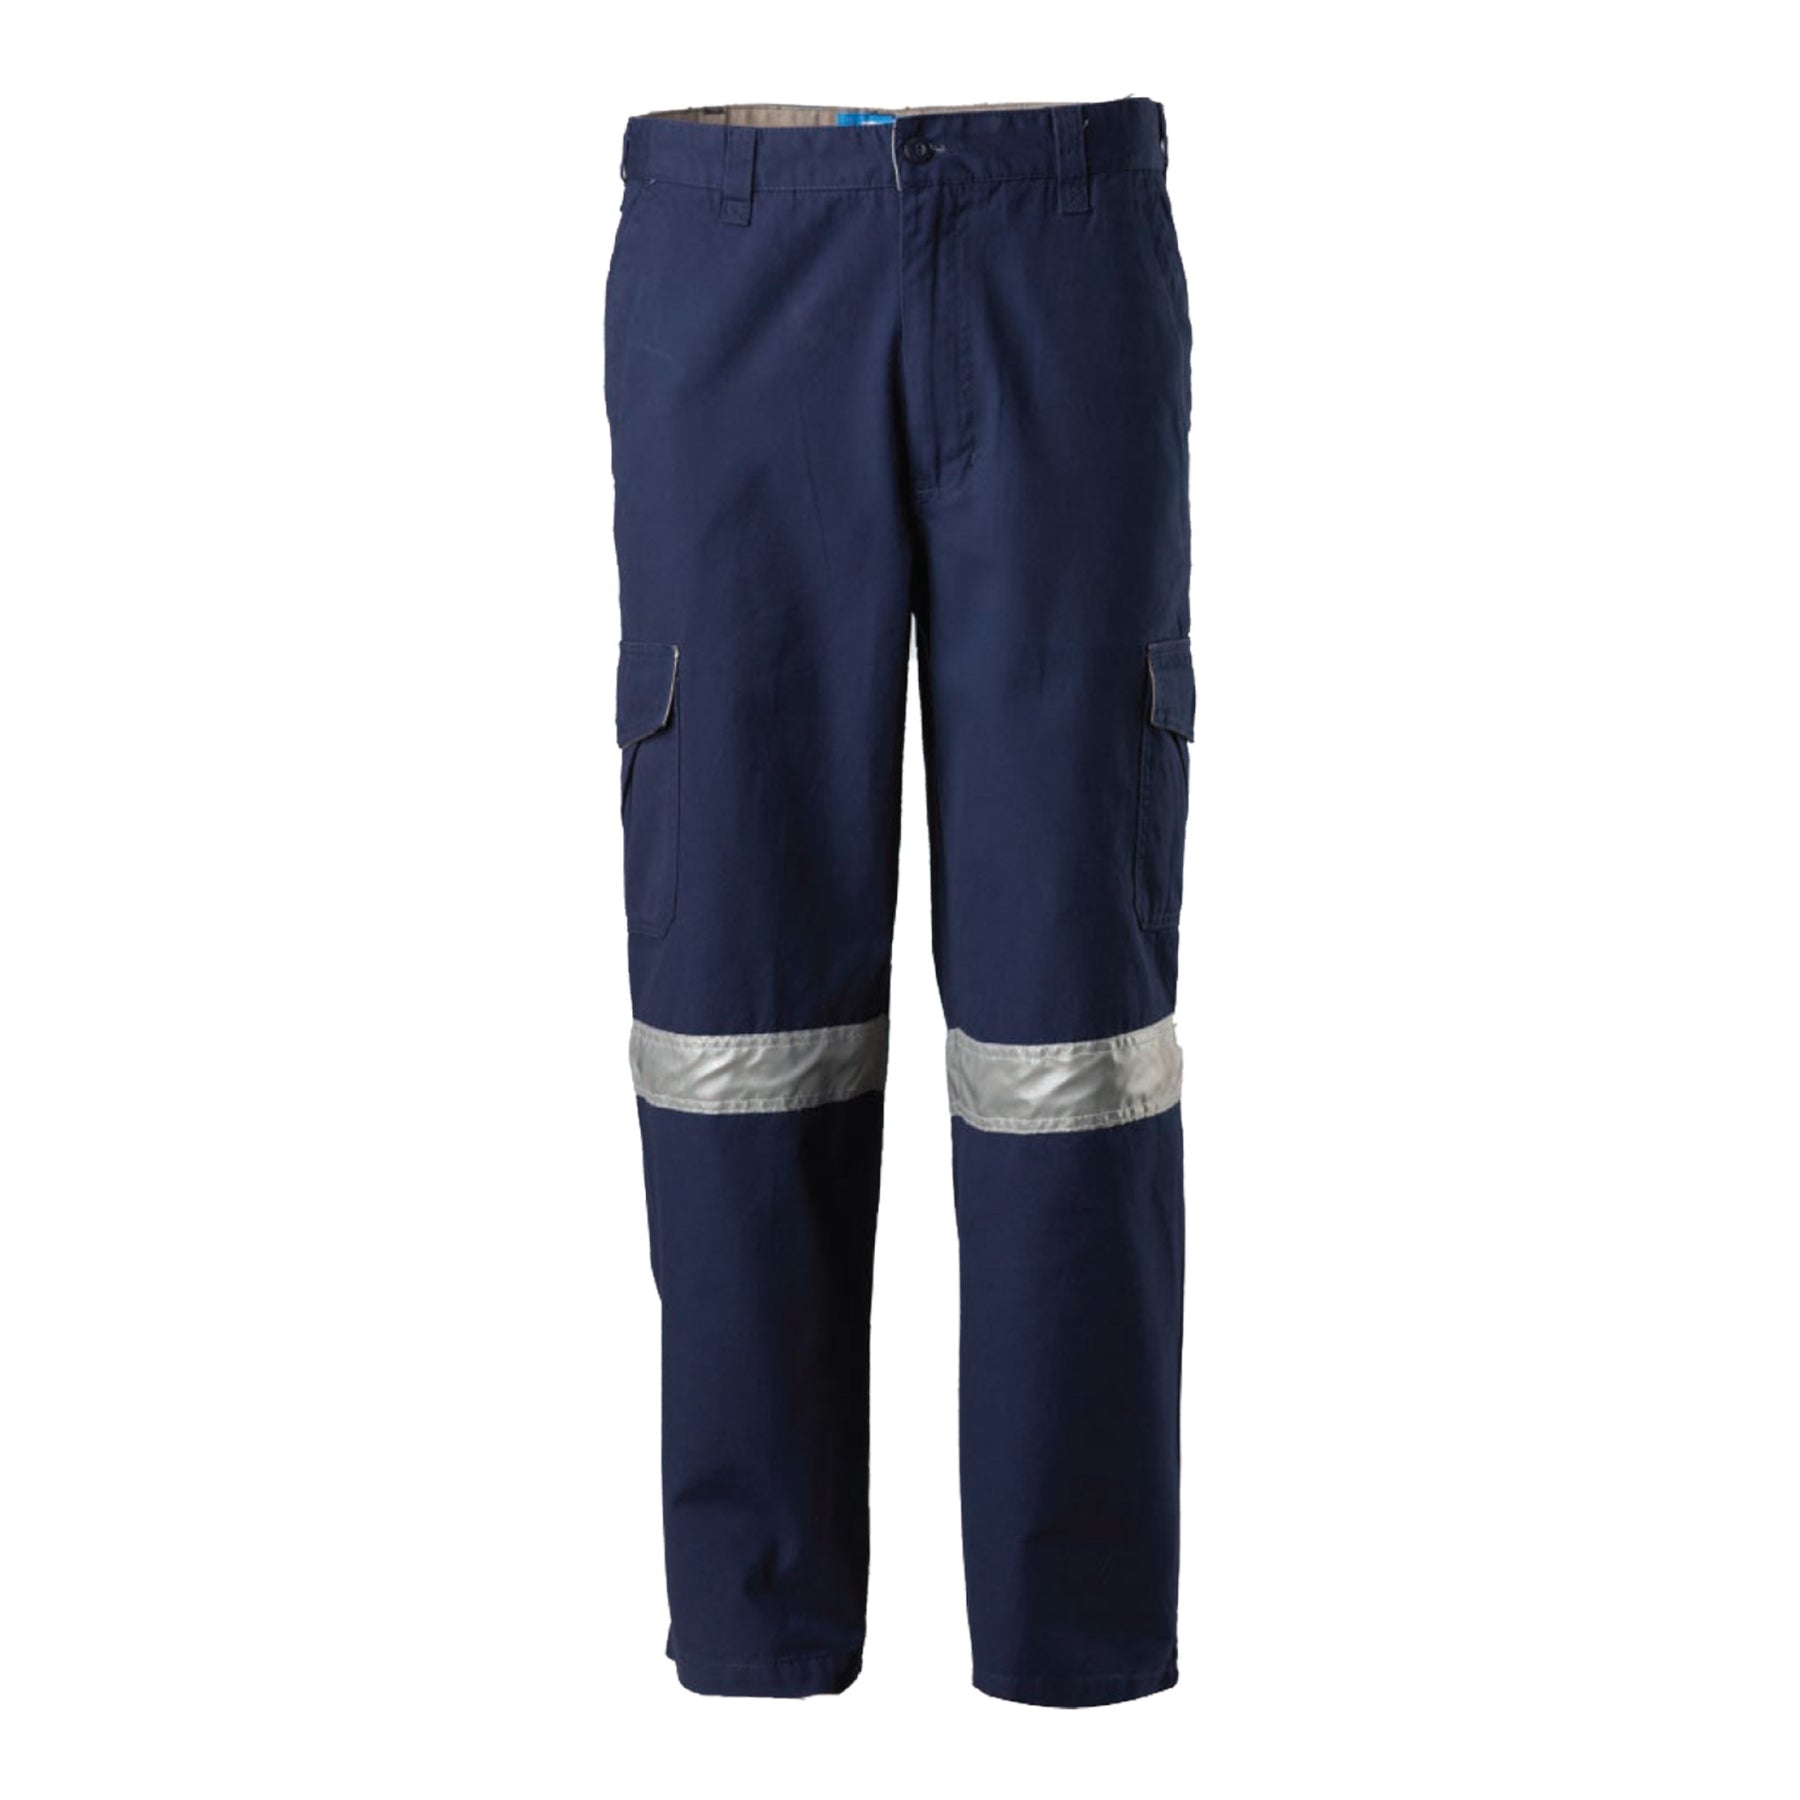 navy mid weight cotton cargo pants with 3m tape